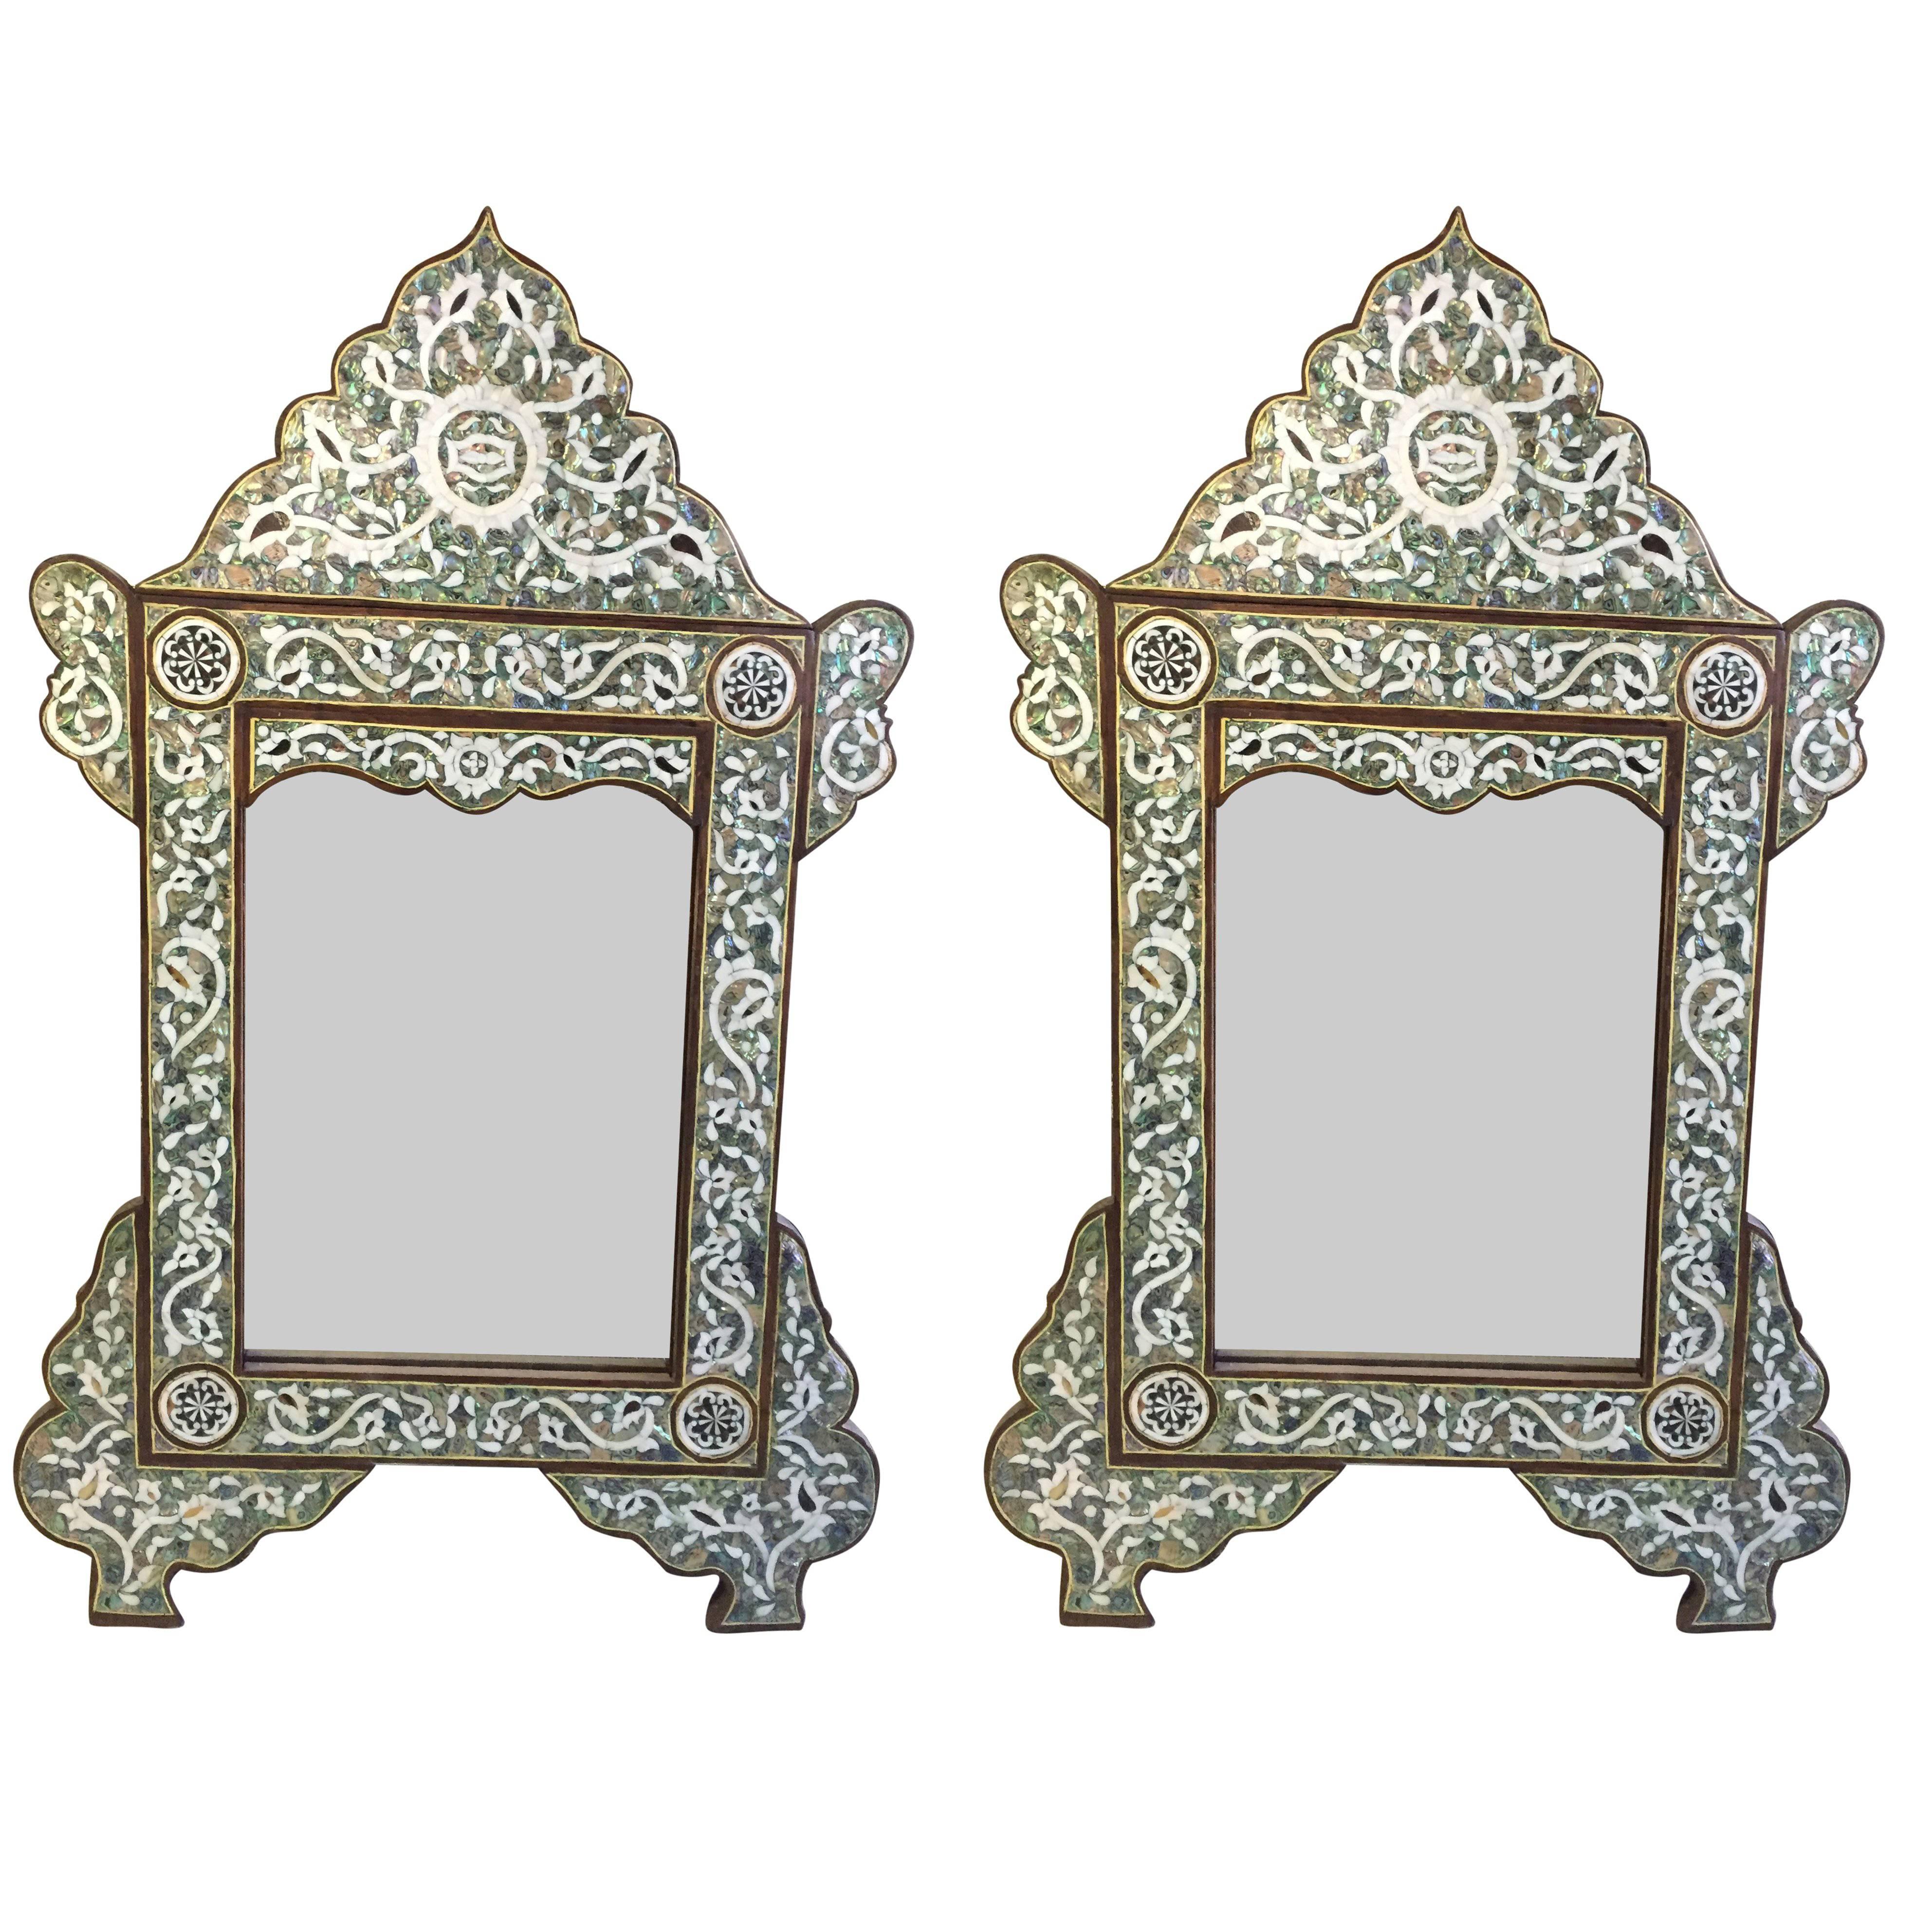 Pair of Moroccan Abalone and Mother-of-Pearl Mirrors